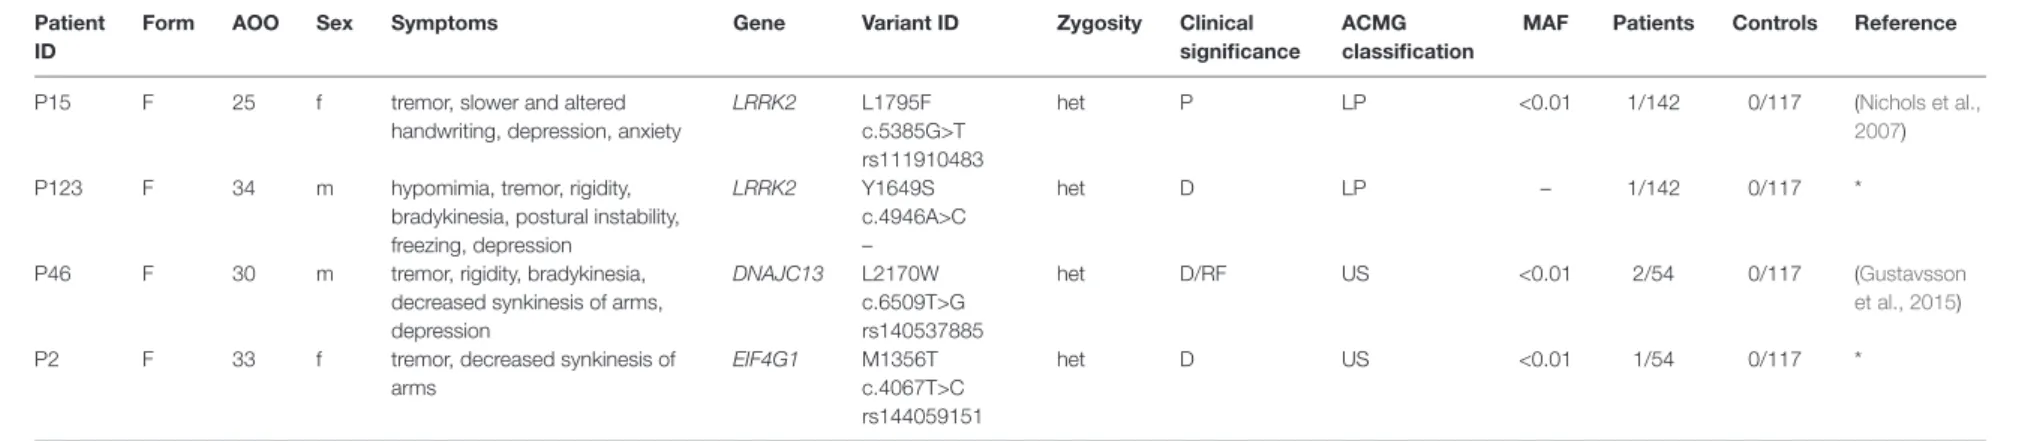 TaBlE 2 | Patients with rare substitutions in AD-PD-associated genes.